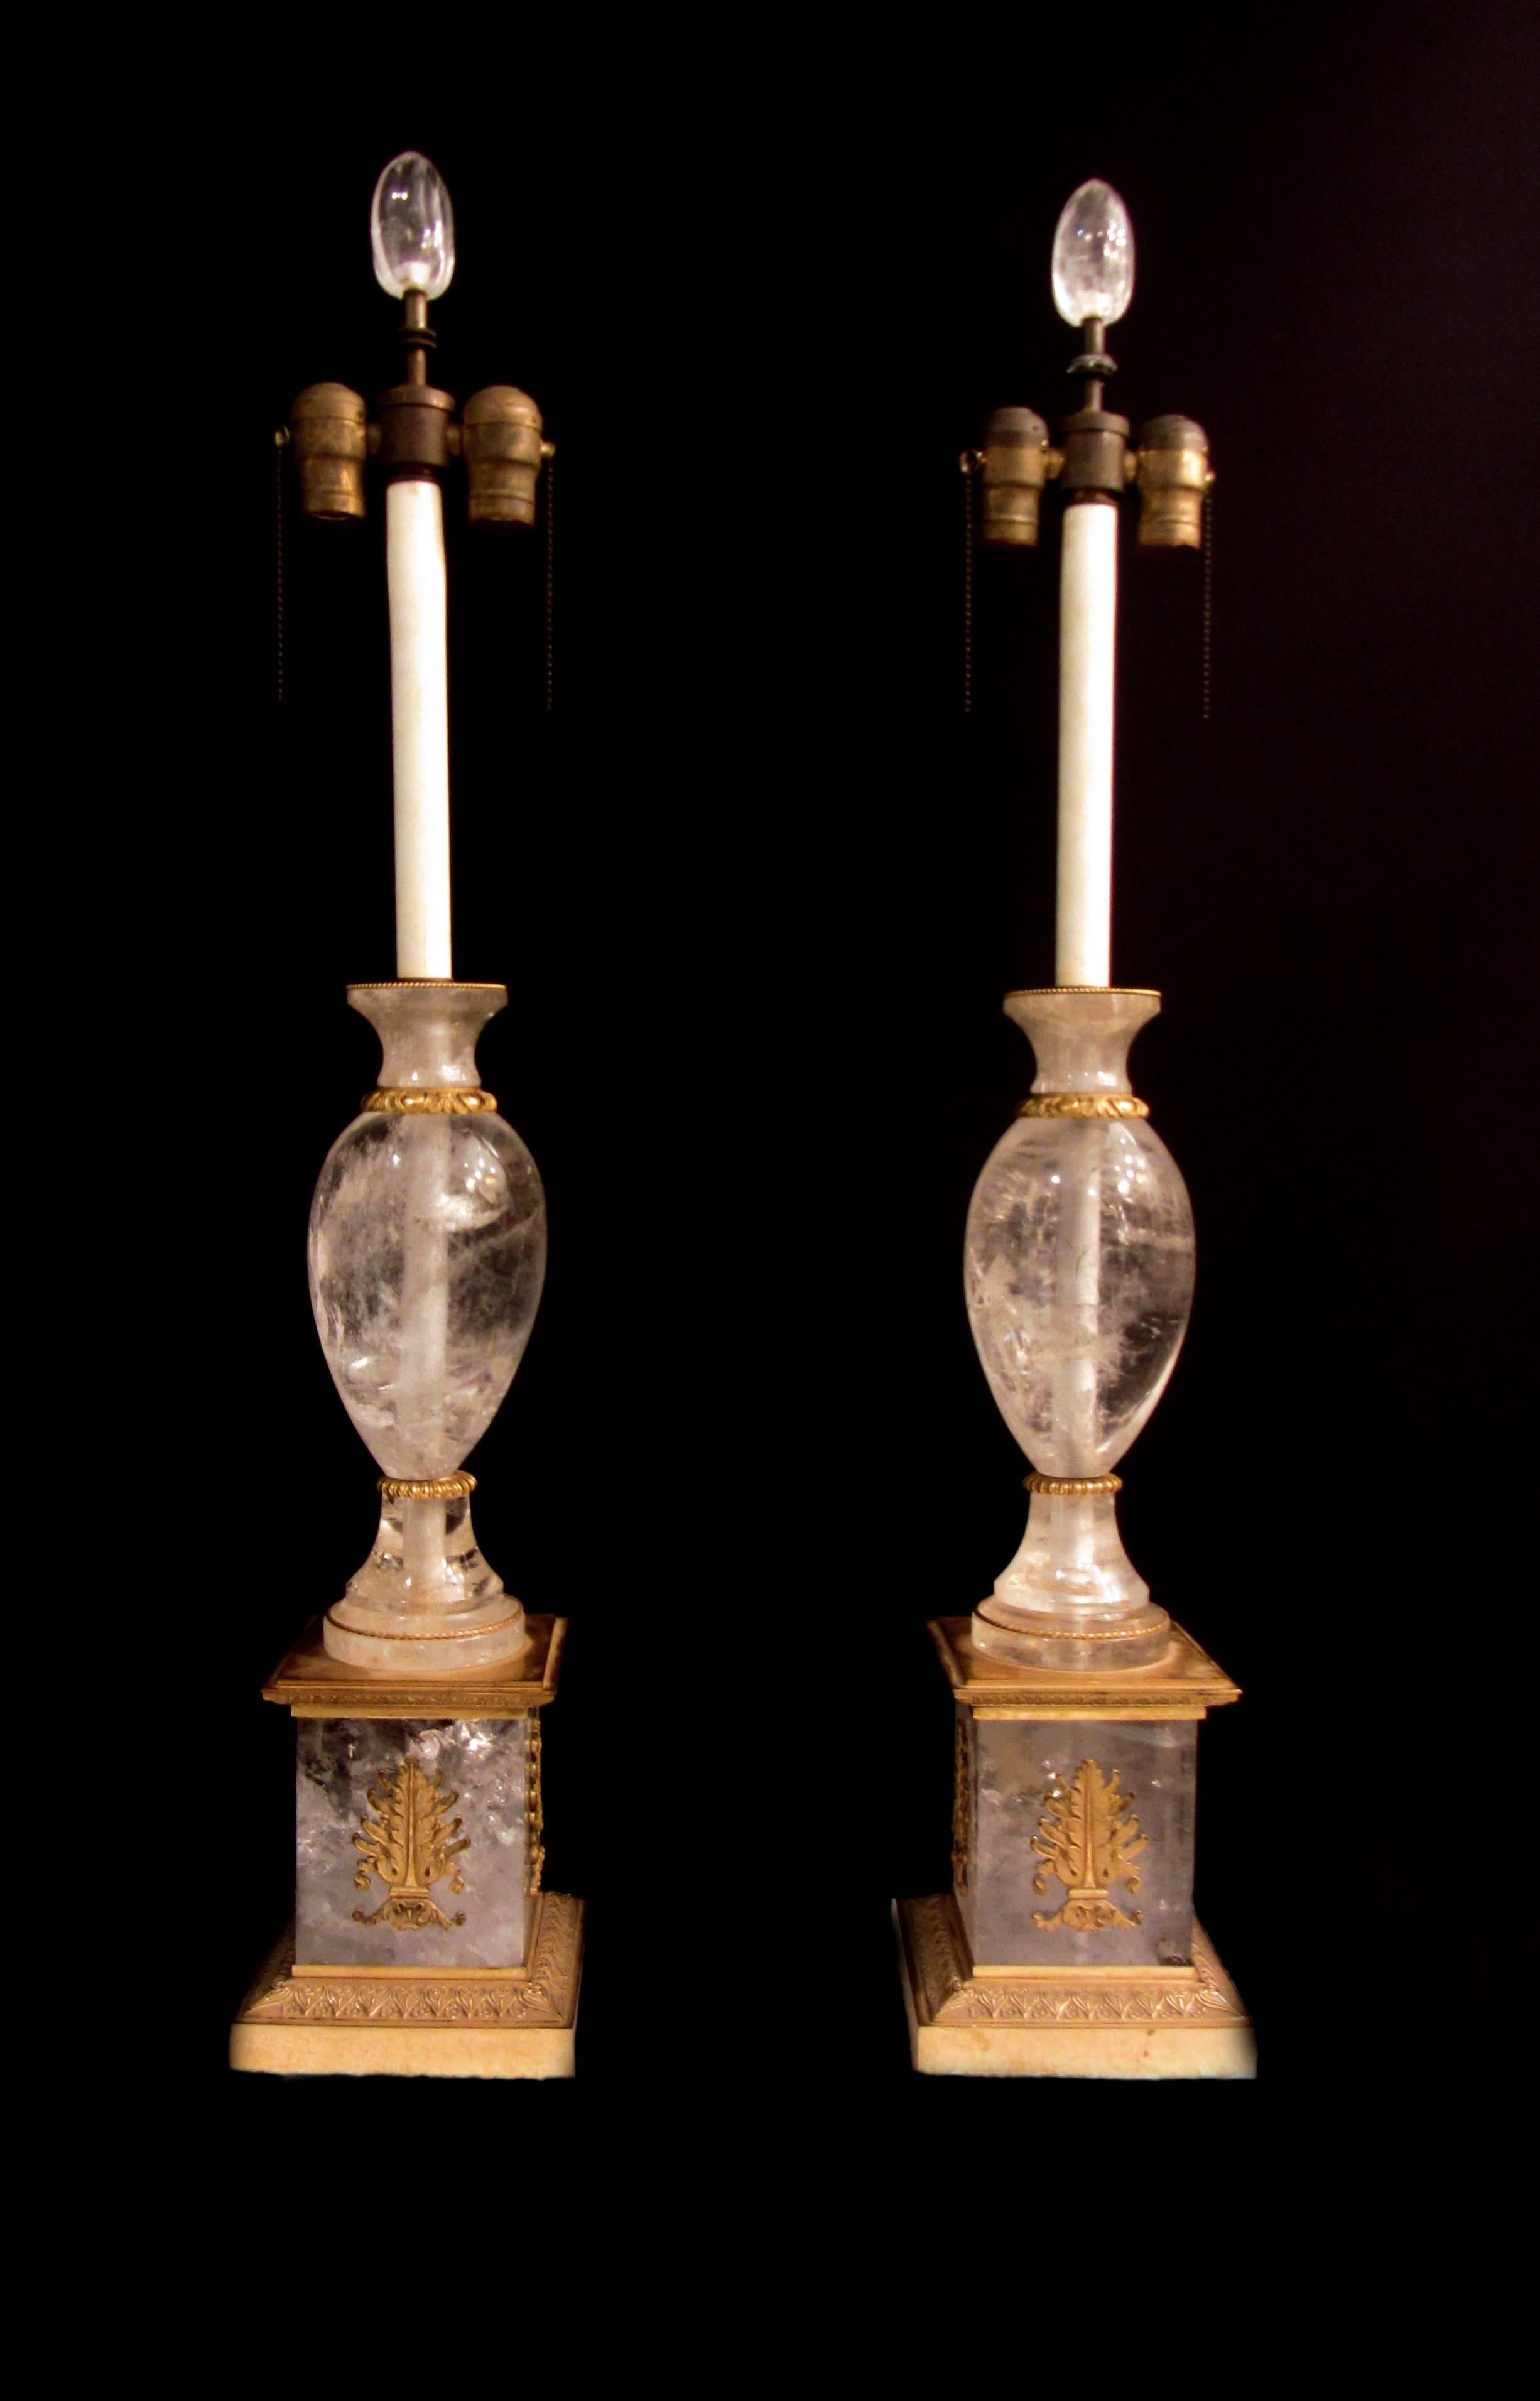 20th Century Pair of Antique French Empire Style Rock Crystal Table Lamps